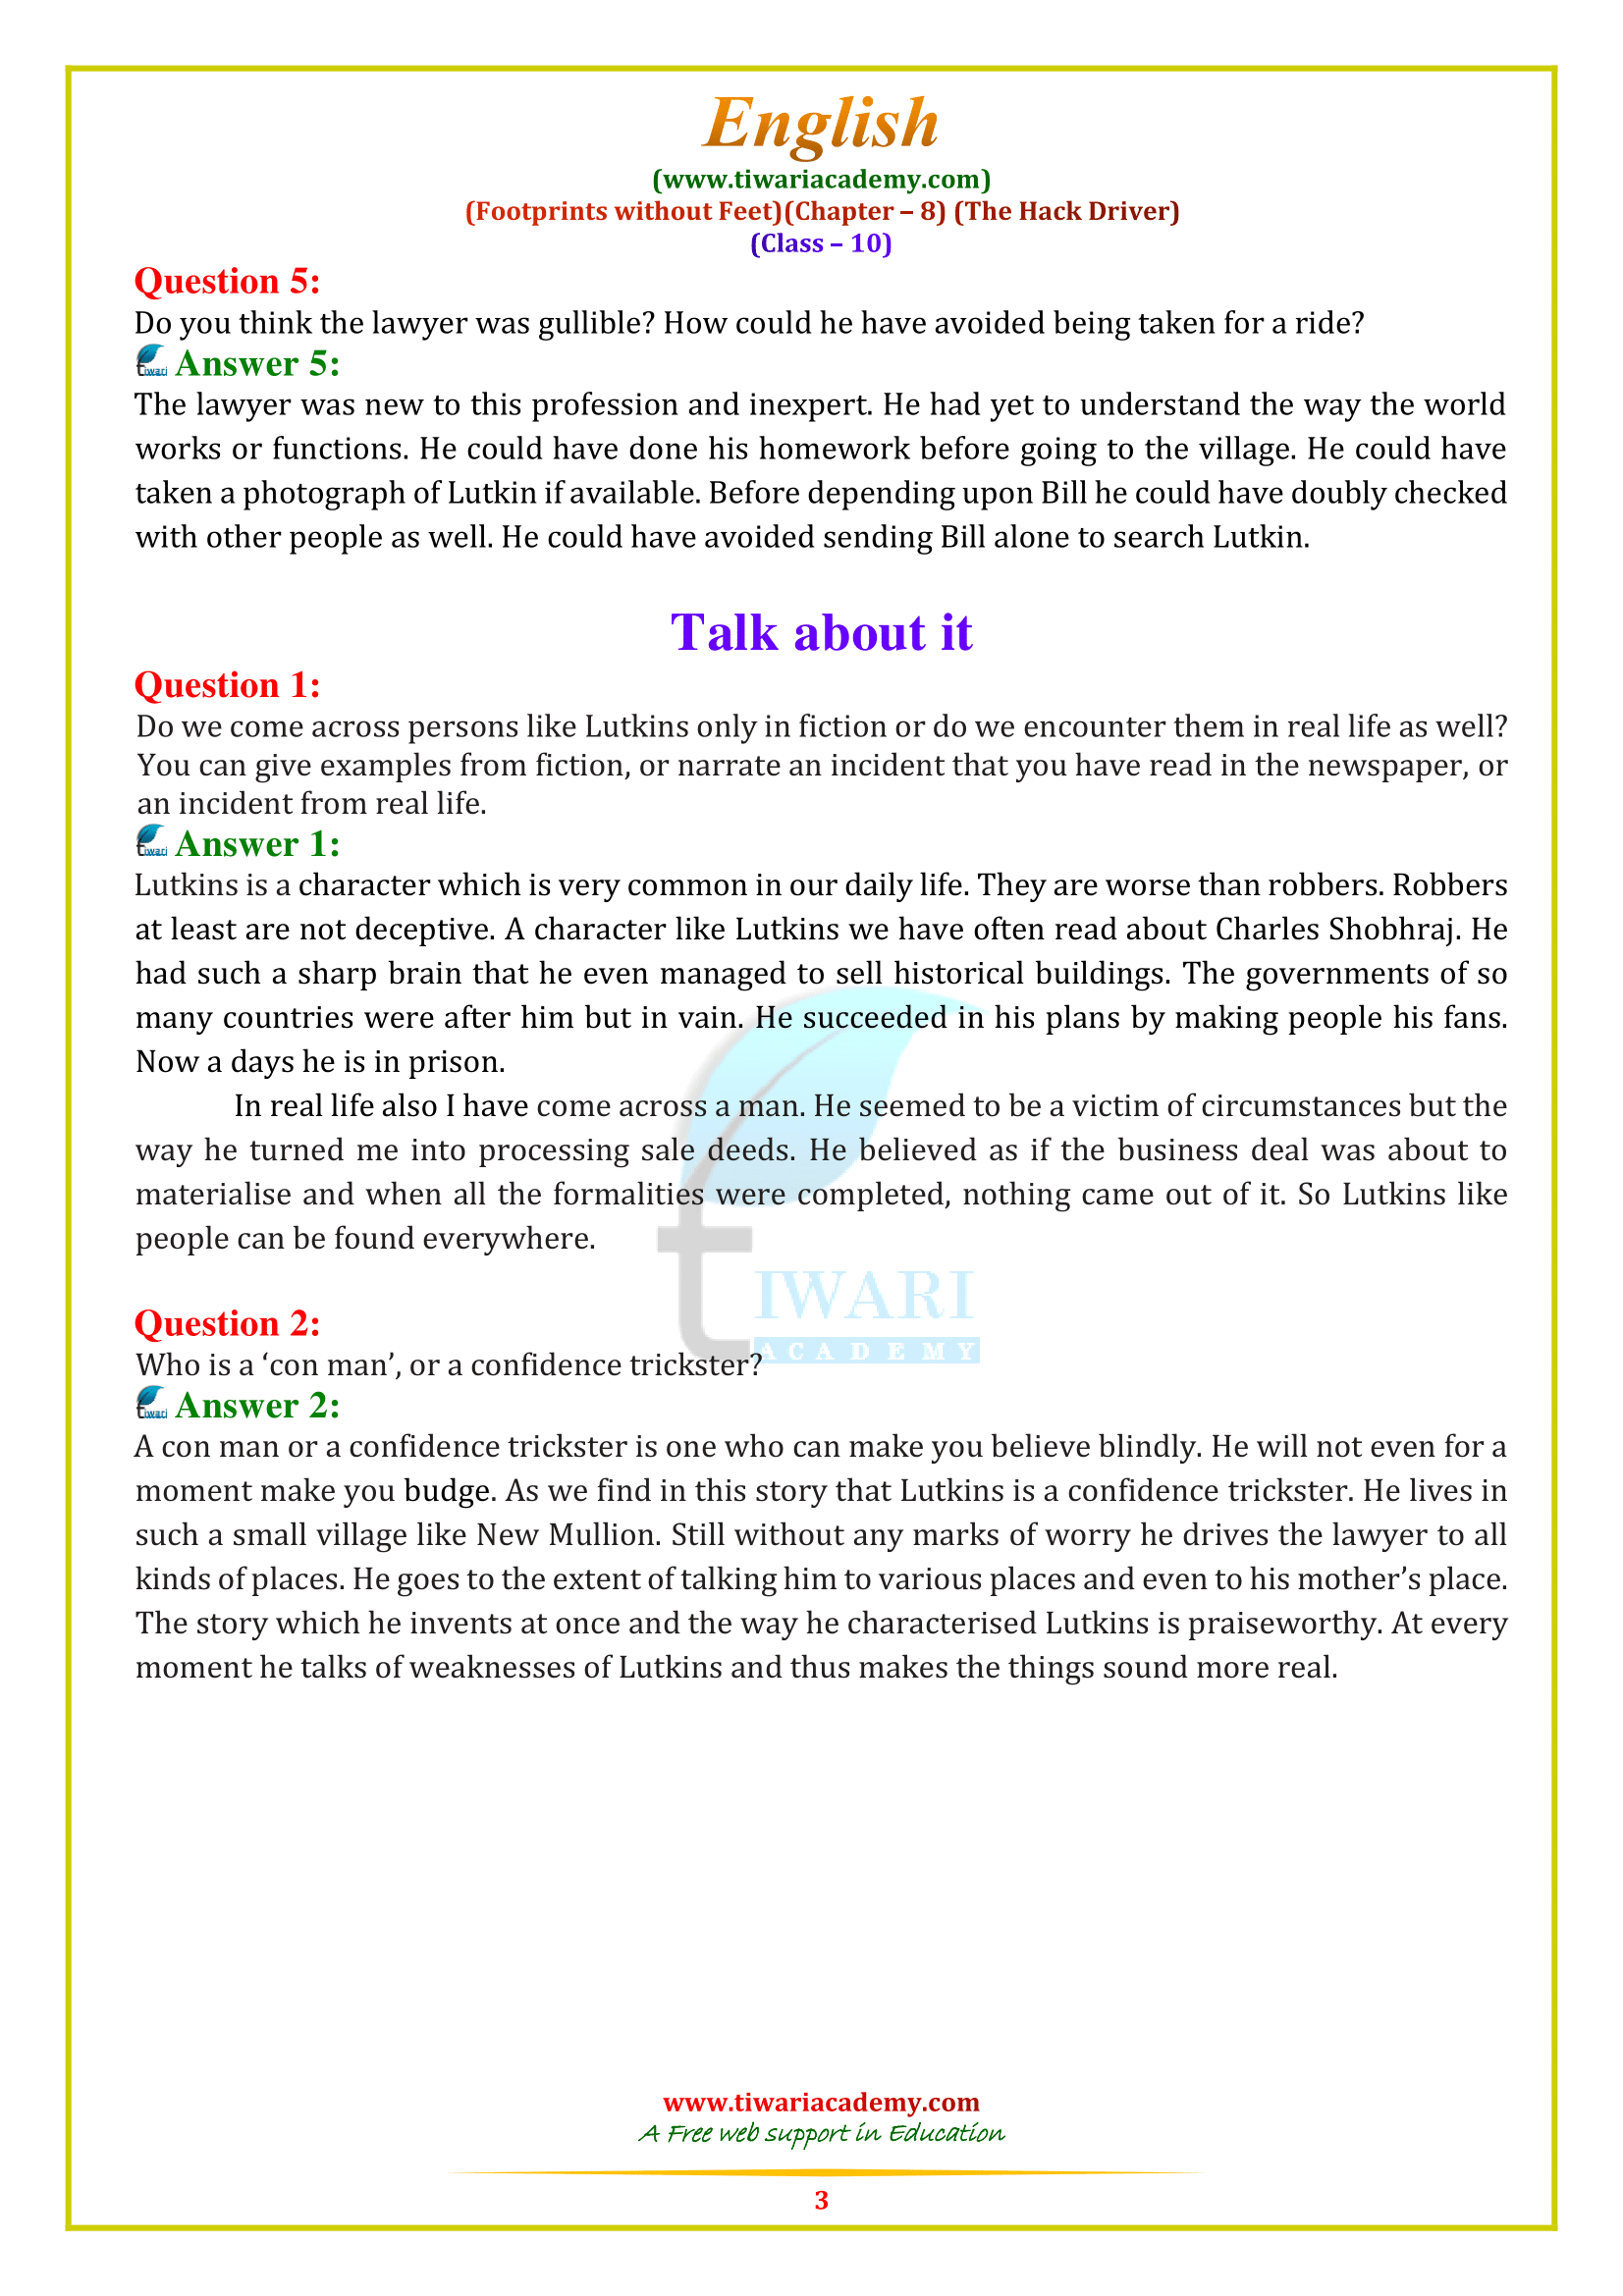 10 English supplementry ch. 8